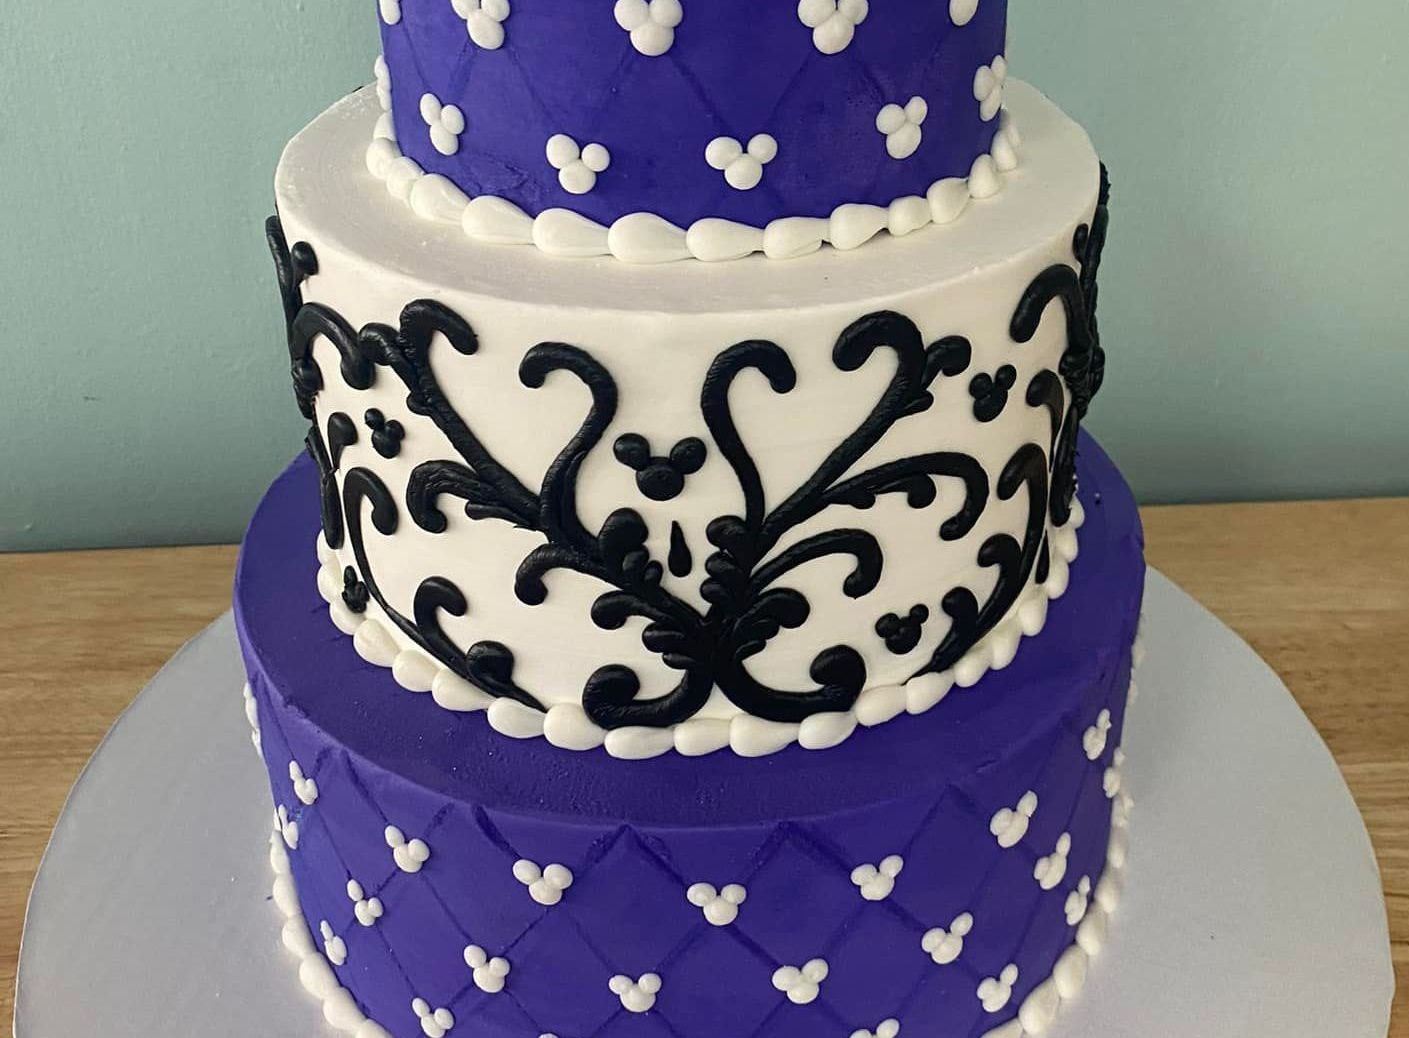 A tiered cake iced in white and purple with black swirls